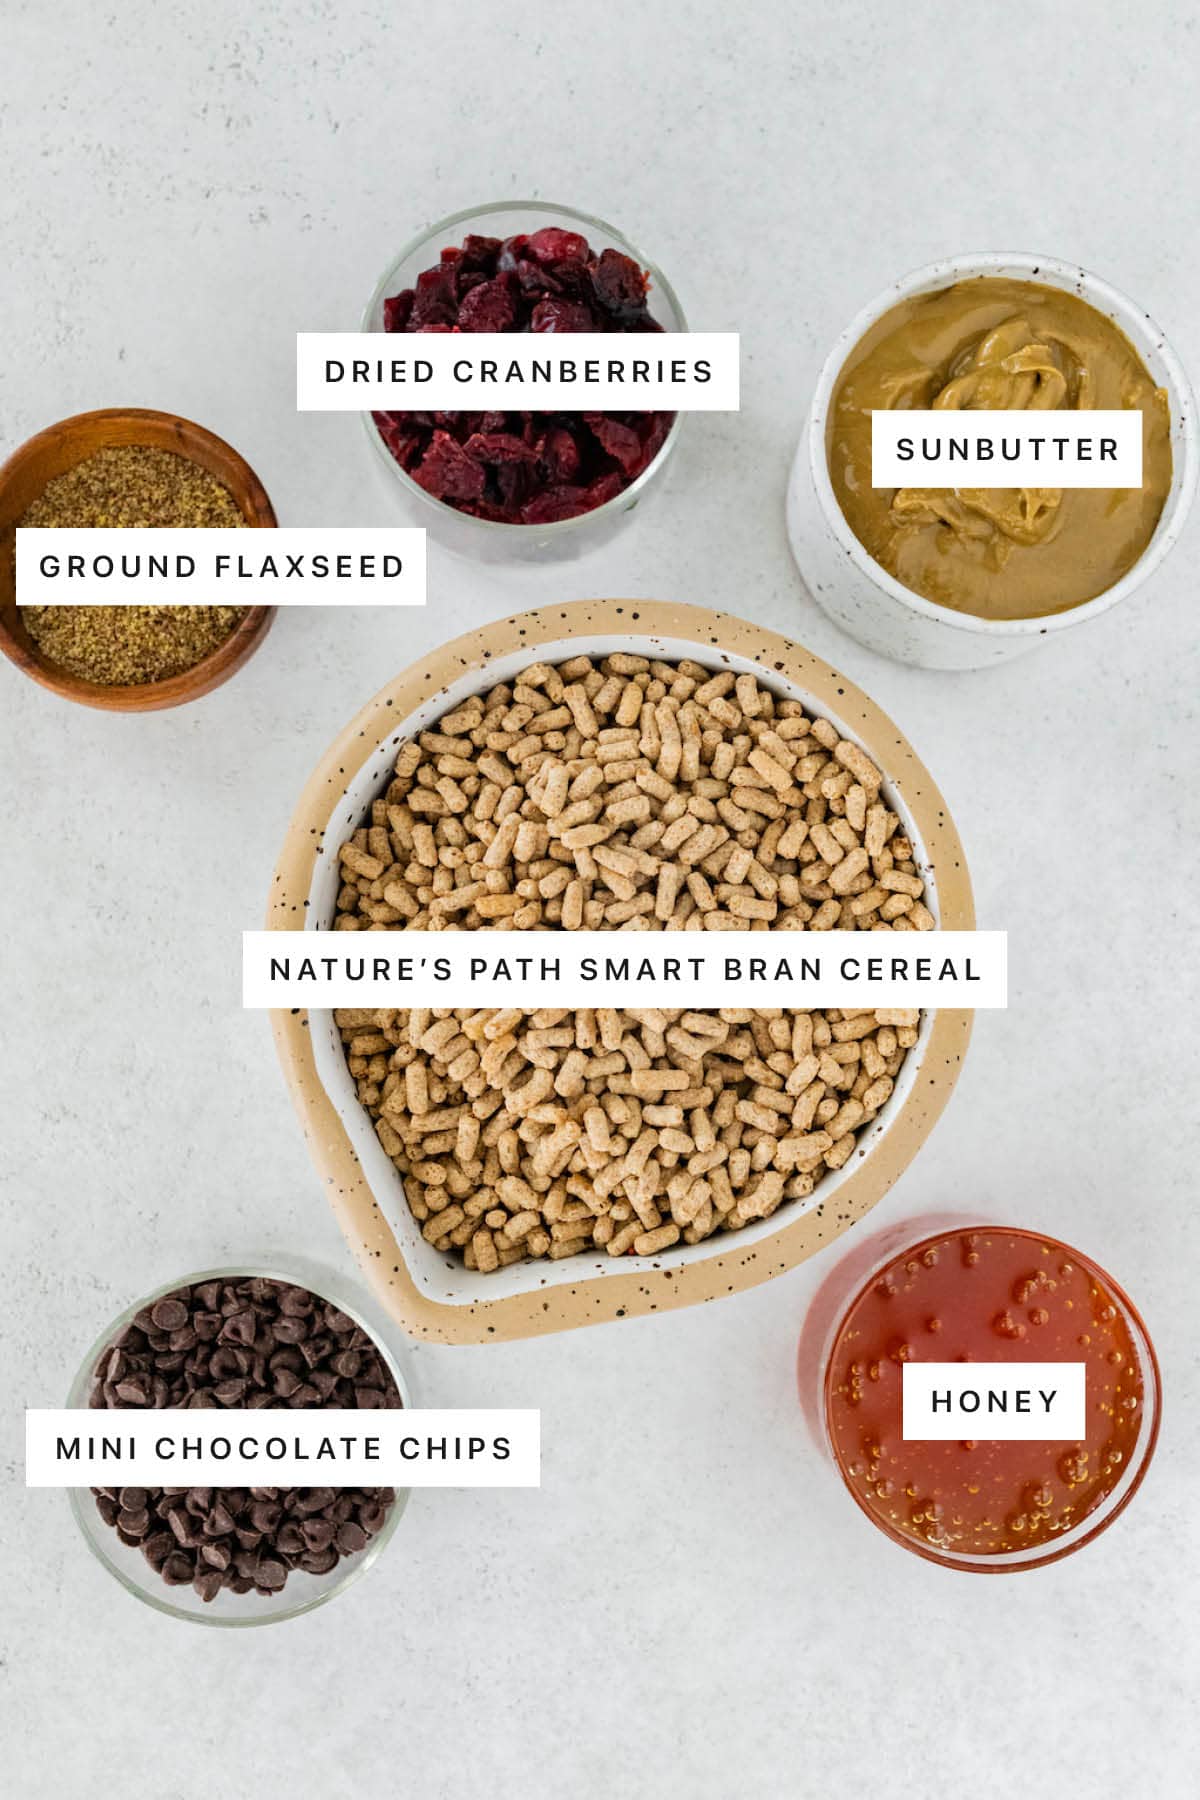 Ingredients measured out to make No Bake High Fiber Bars: ground flaxseed, dried cranberries, sunbutter, bran cereal, mini chocolate chips and honey.